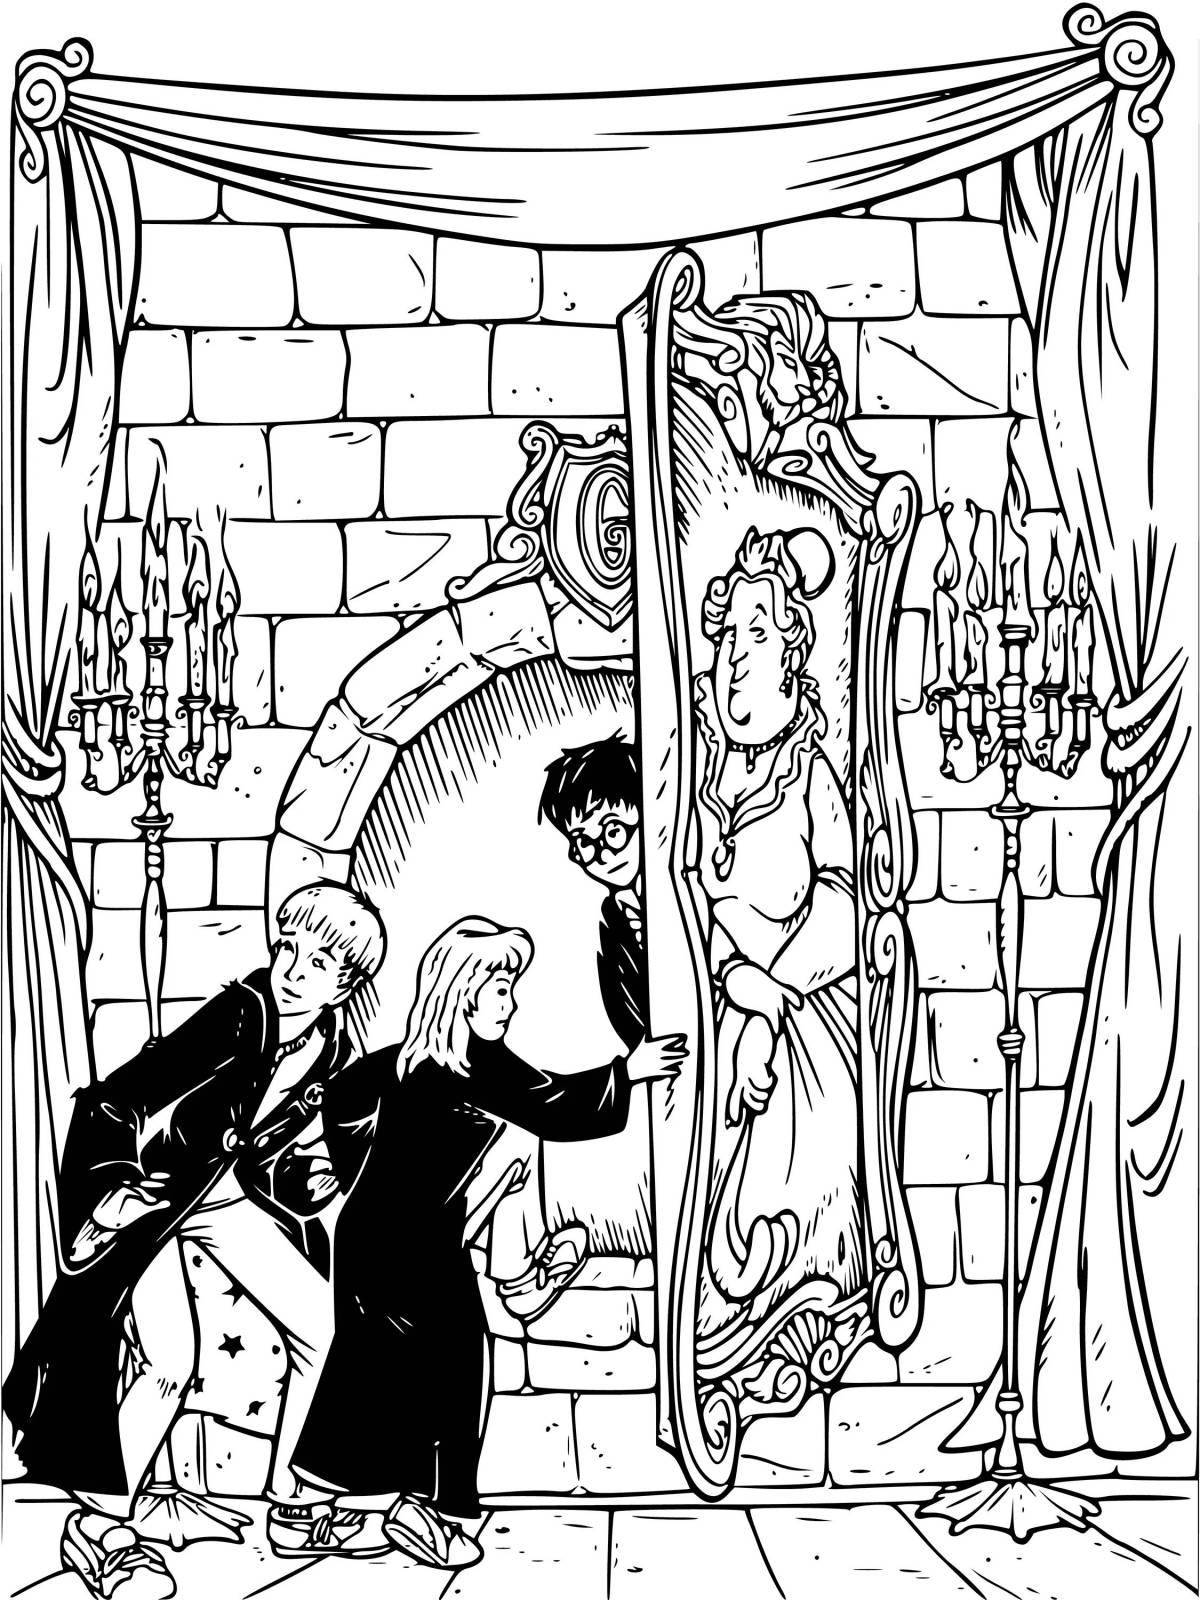 Great harry potter and the philosopher's stone coloring book